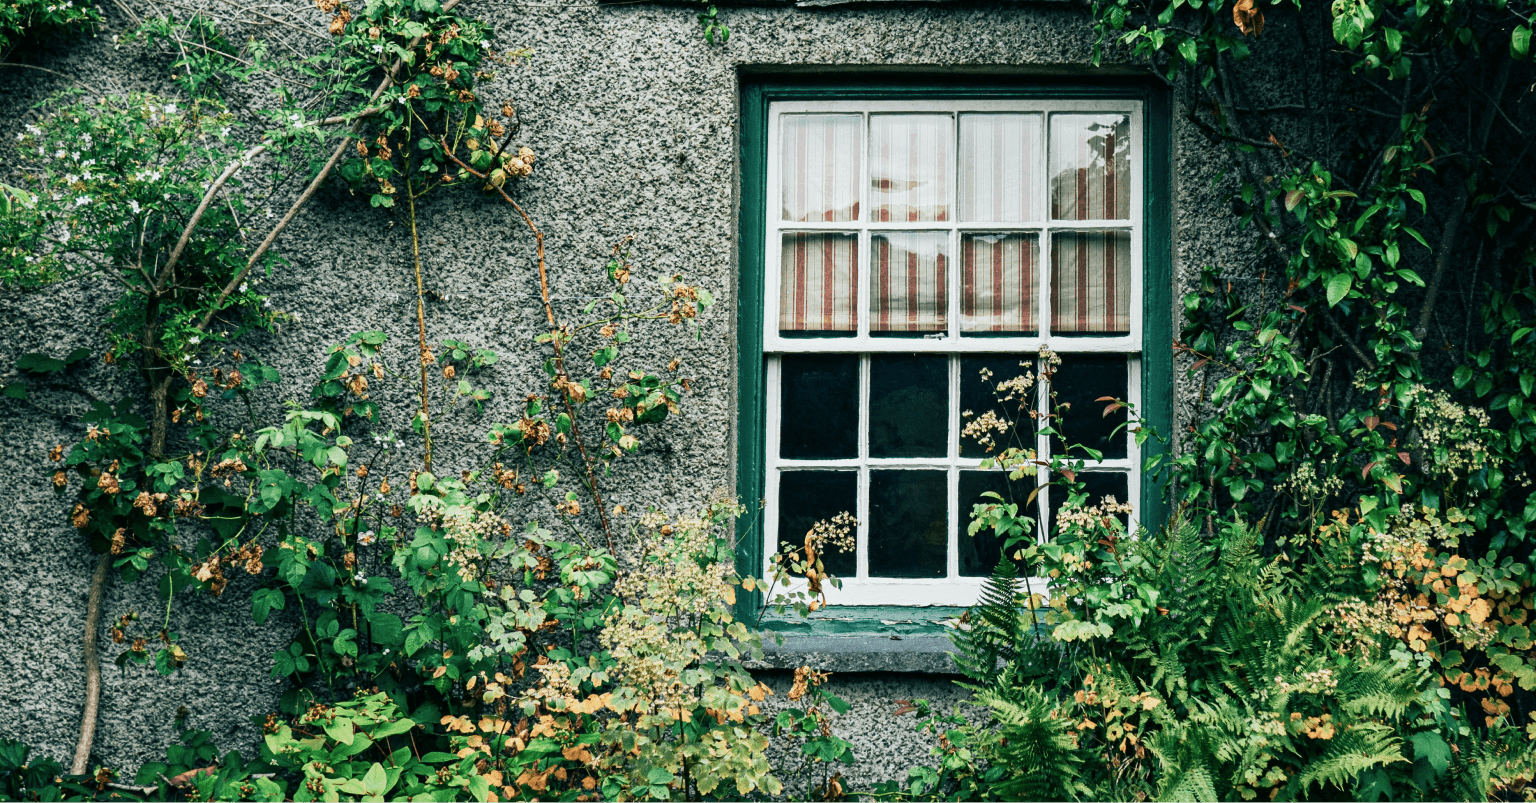 Photograph of the size of a pebbledashed house in the UK, showing a green framed sash window with ivy on the surrounding walls.